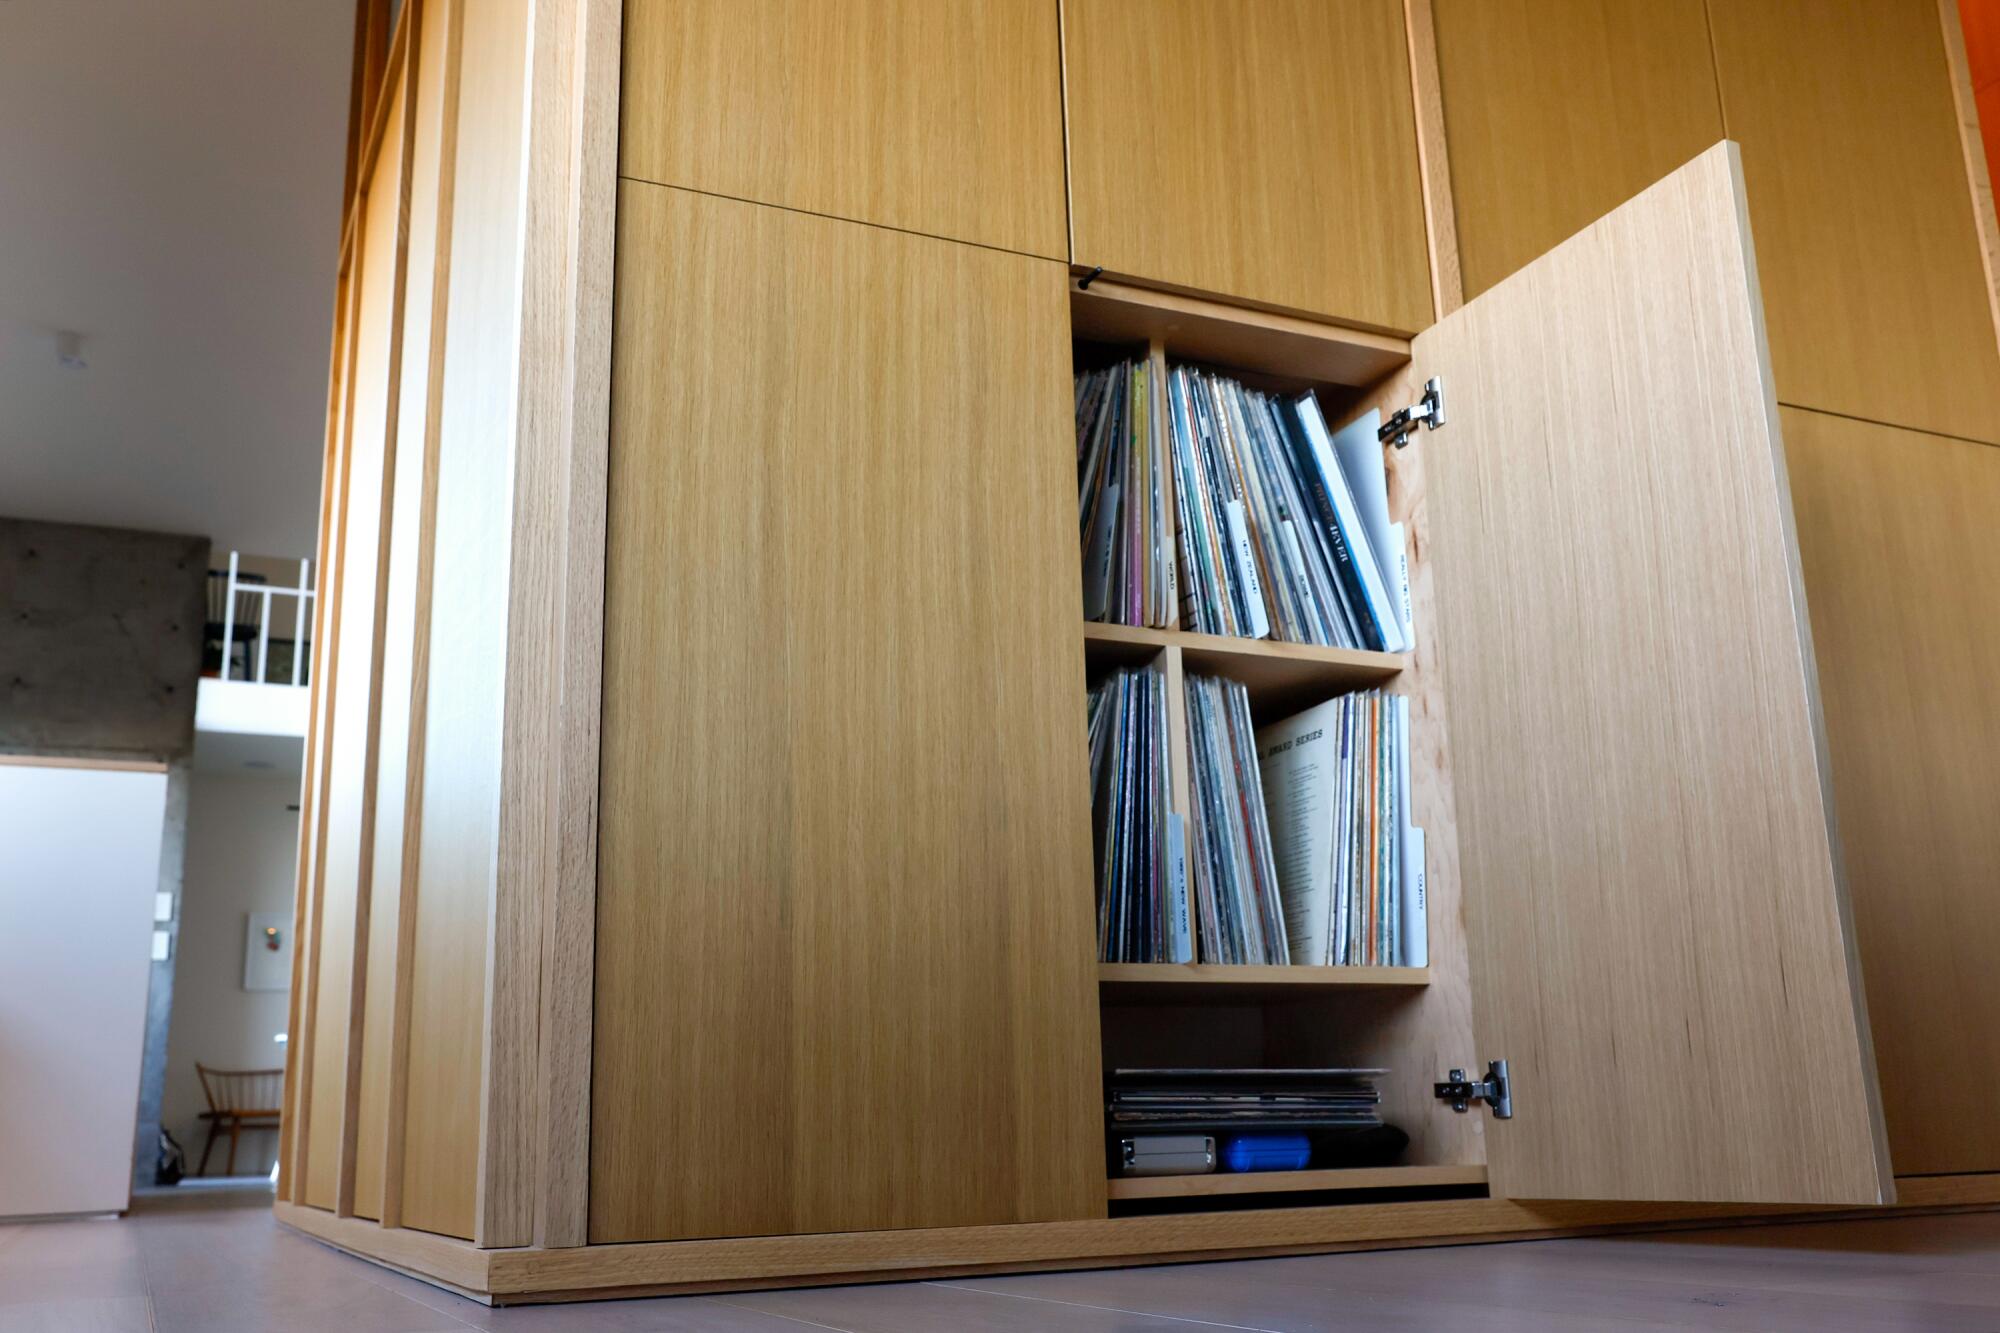 Records are hidden behind light wood cabinets that look hidden in the walls. 